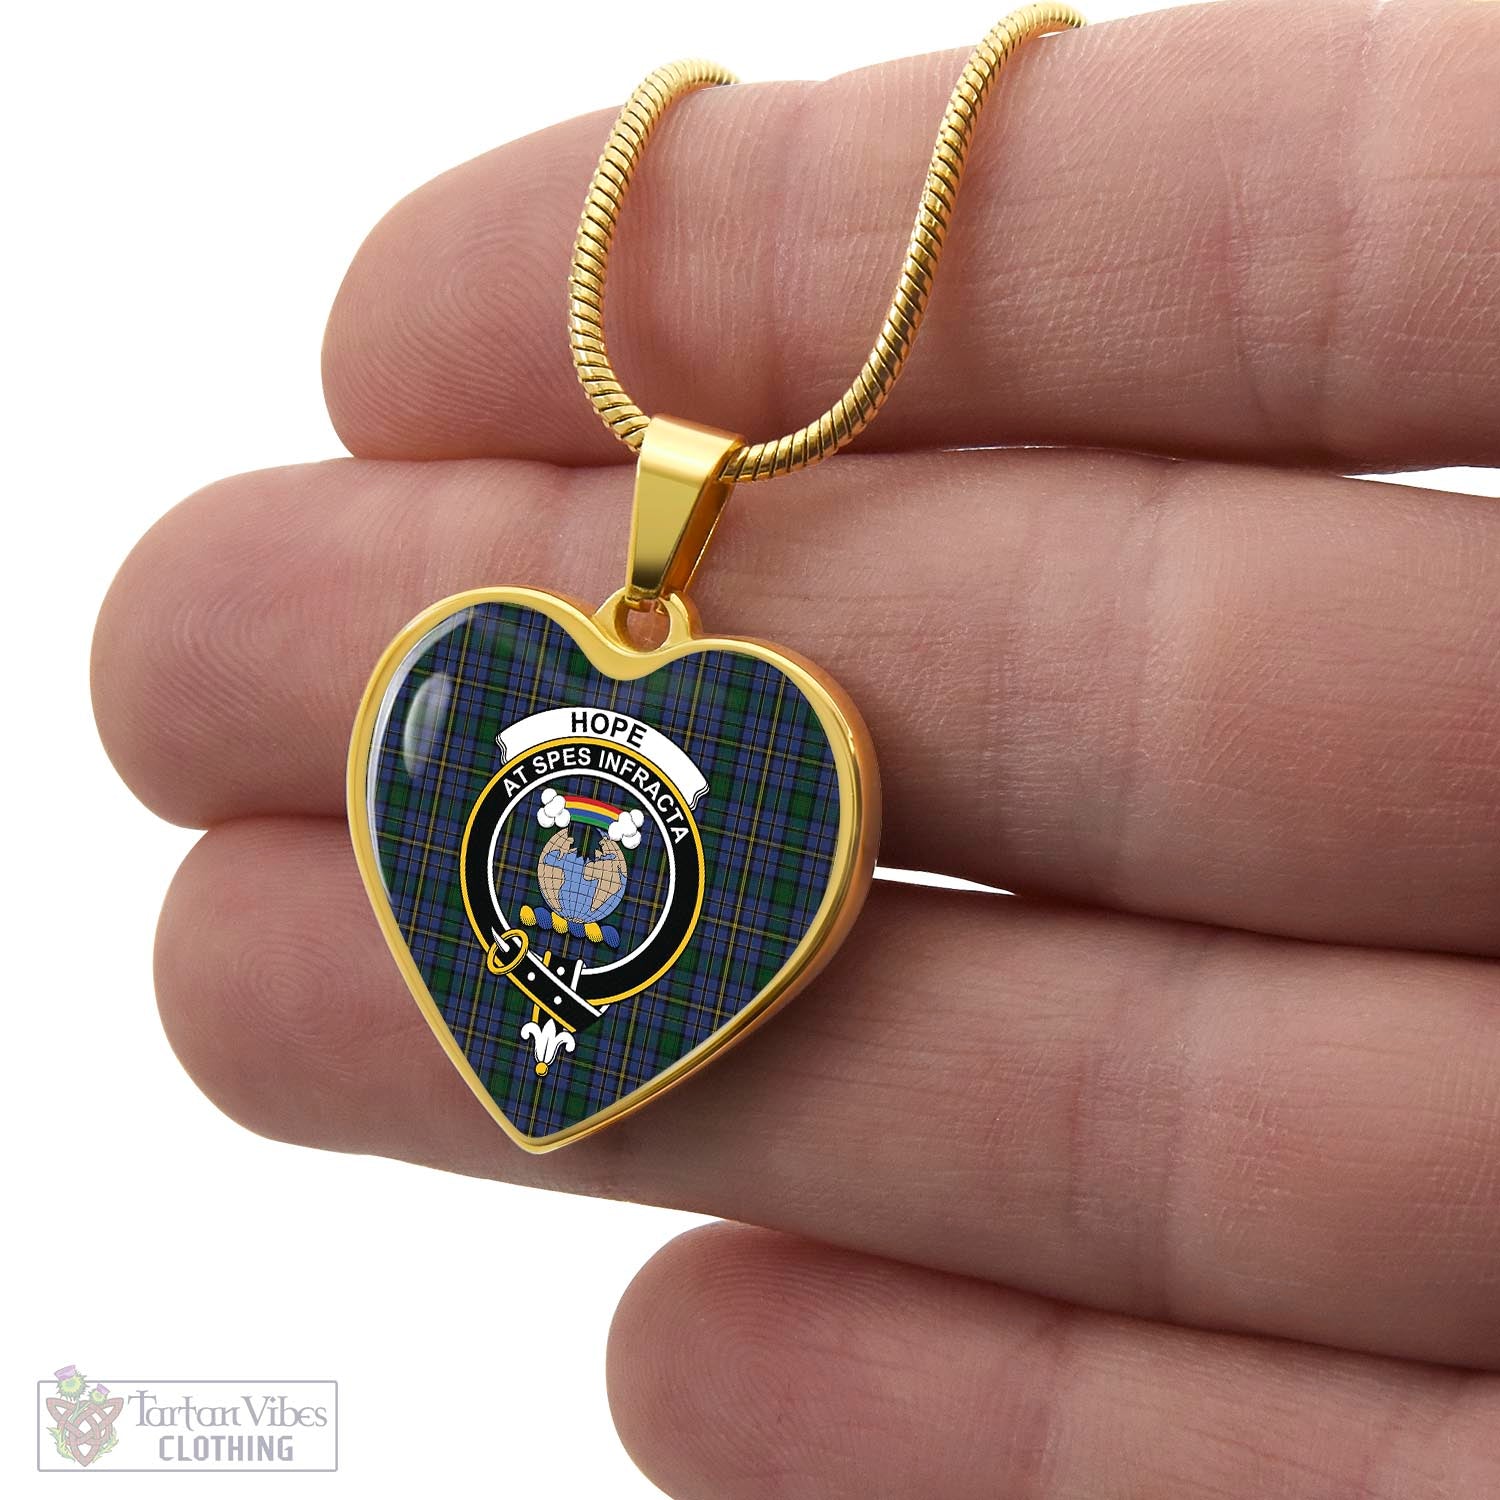 Tartan Vibes Clothing Hope Clan Originaux Tartan Heart Necklace with Family Crest